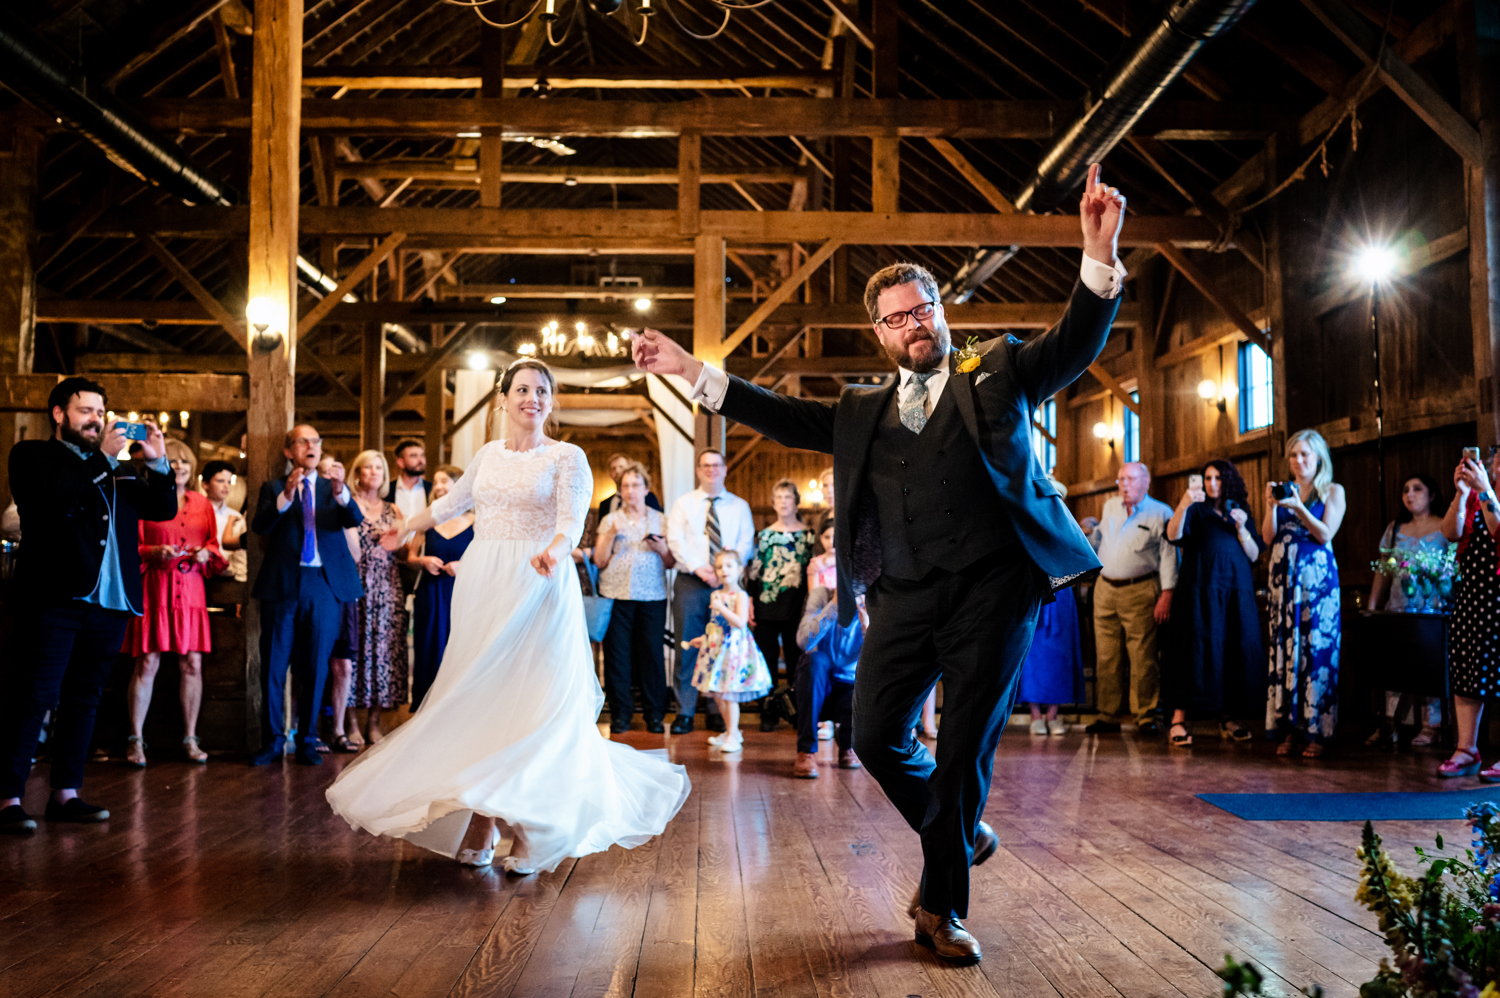 Anne and Jed dancing together in the barn space at their Vermont wedding